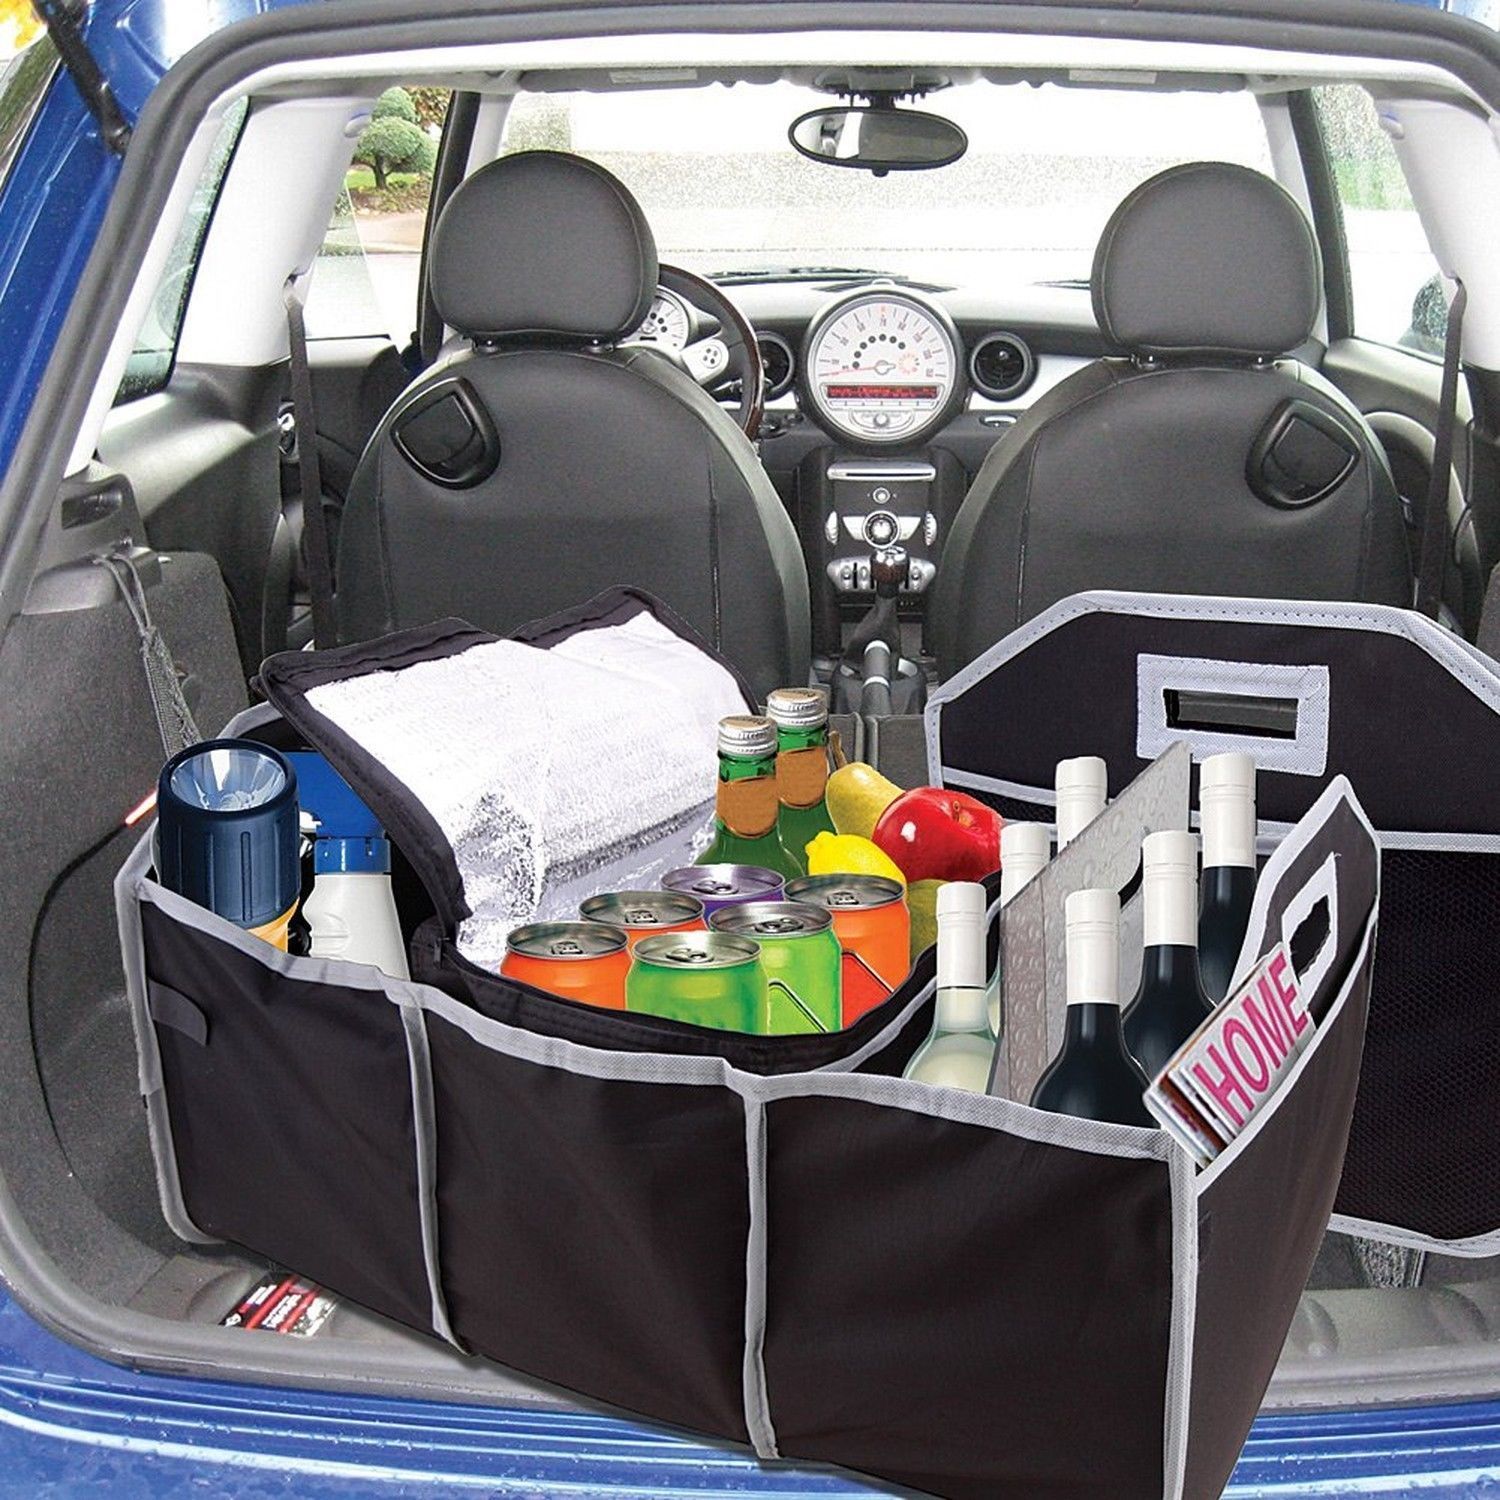 2 in 1 Trunk Organizer & Cooler Set - Fully Collapsible & Portable Storage Set